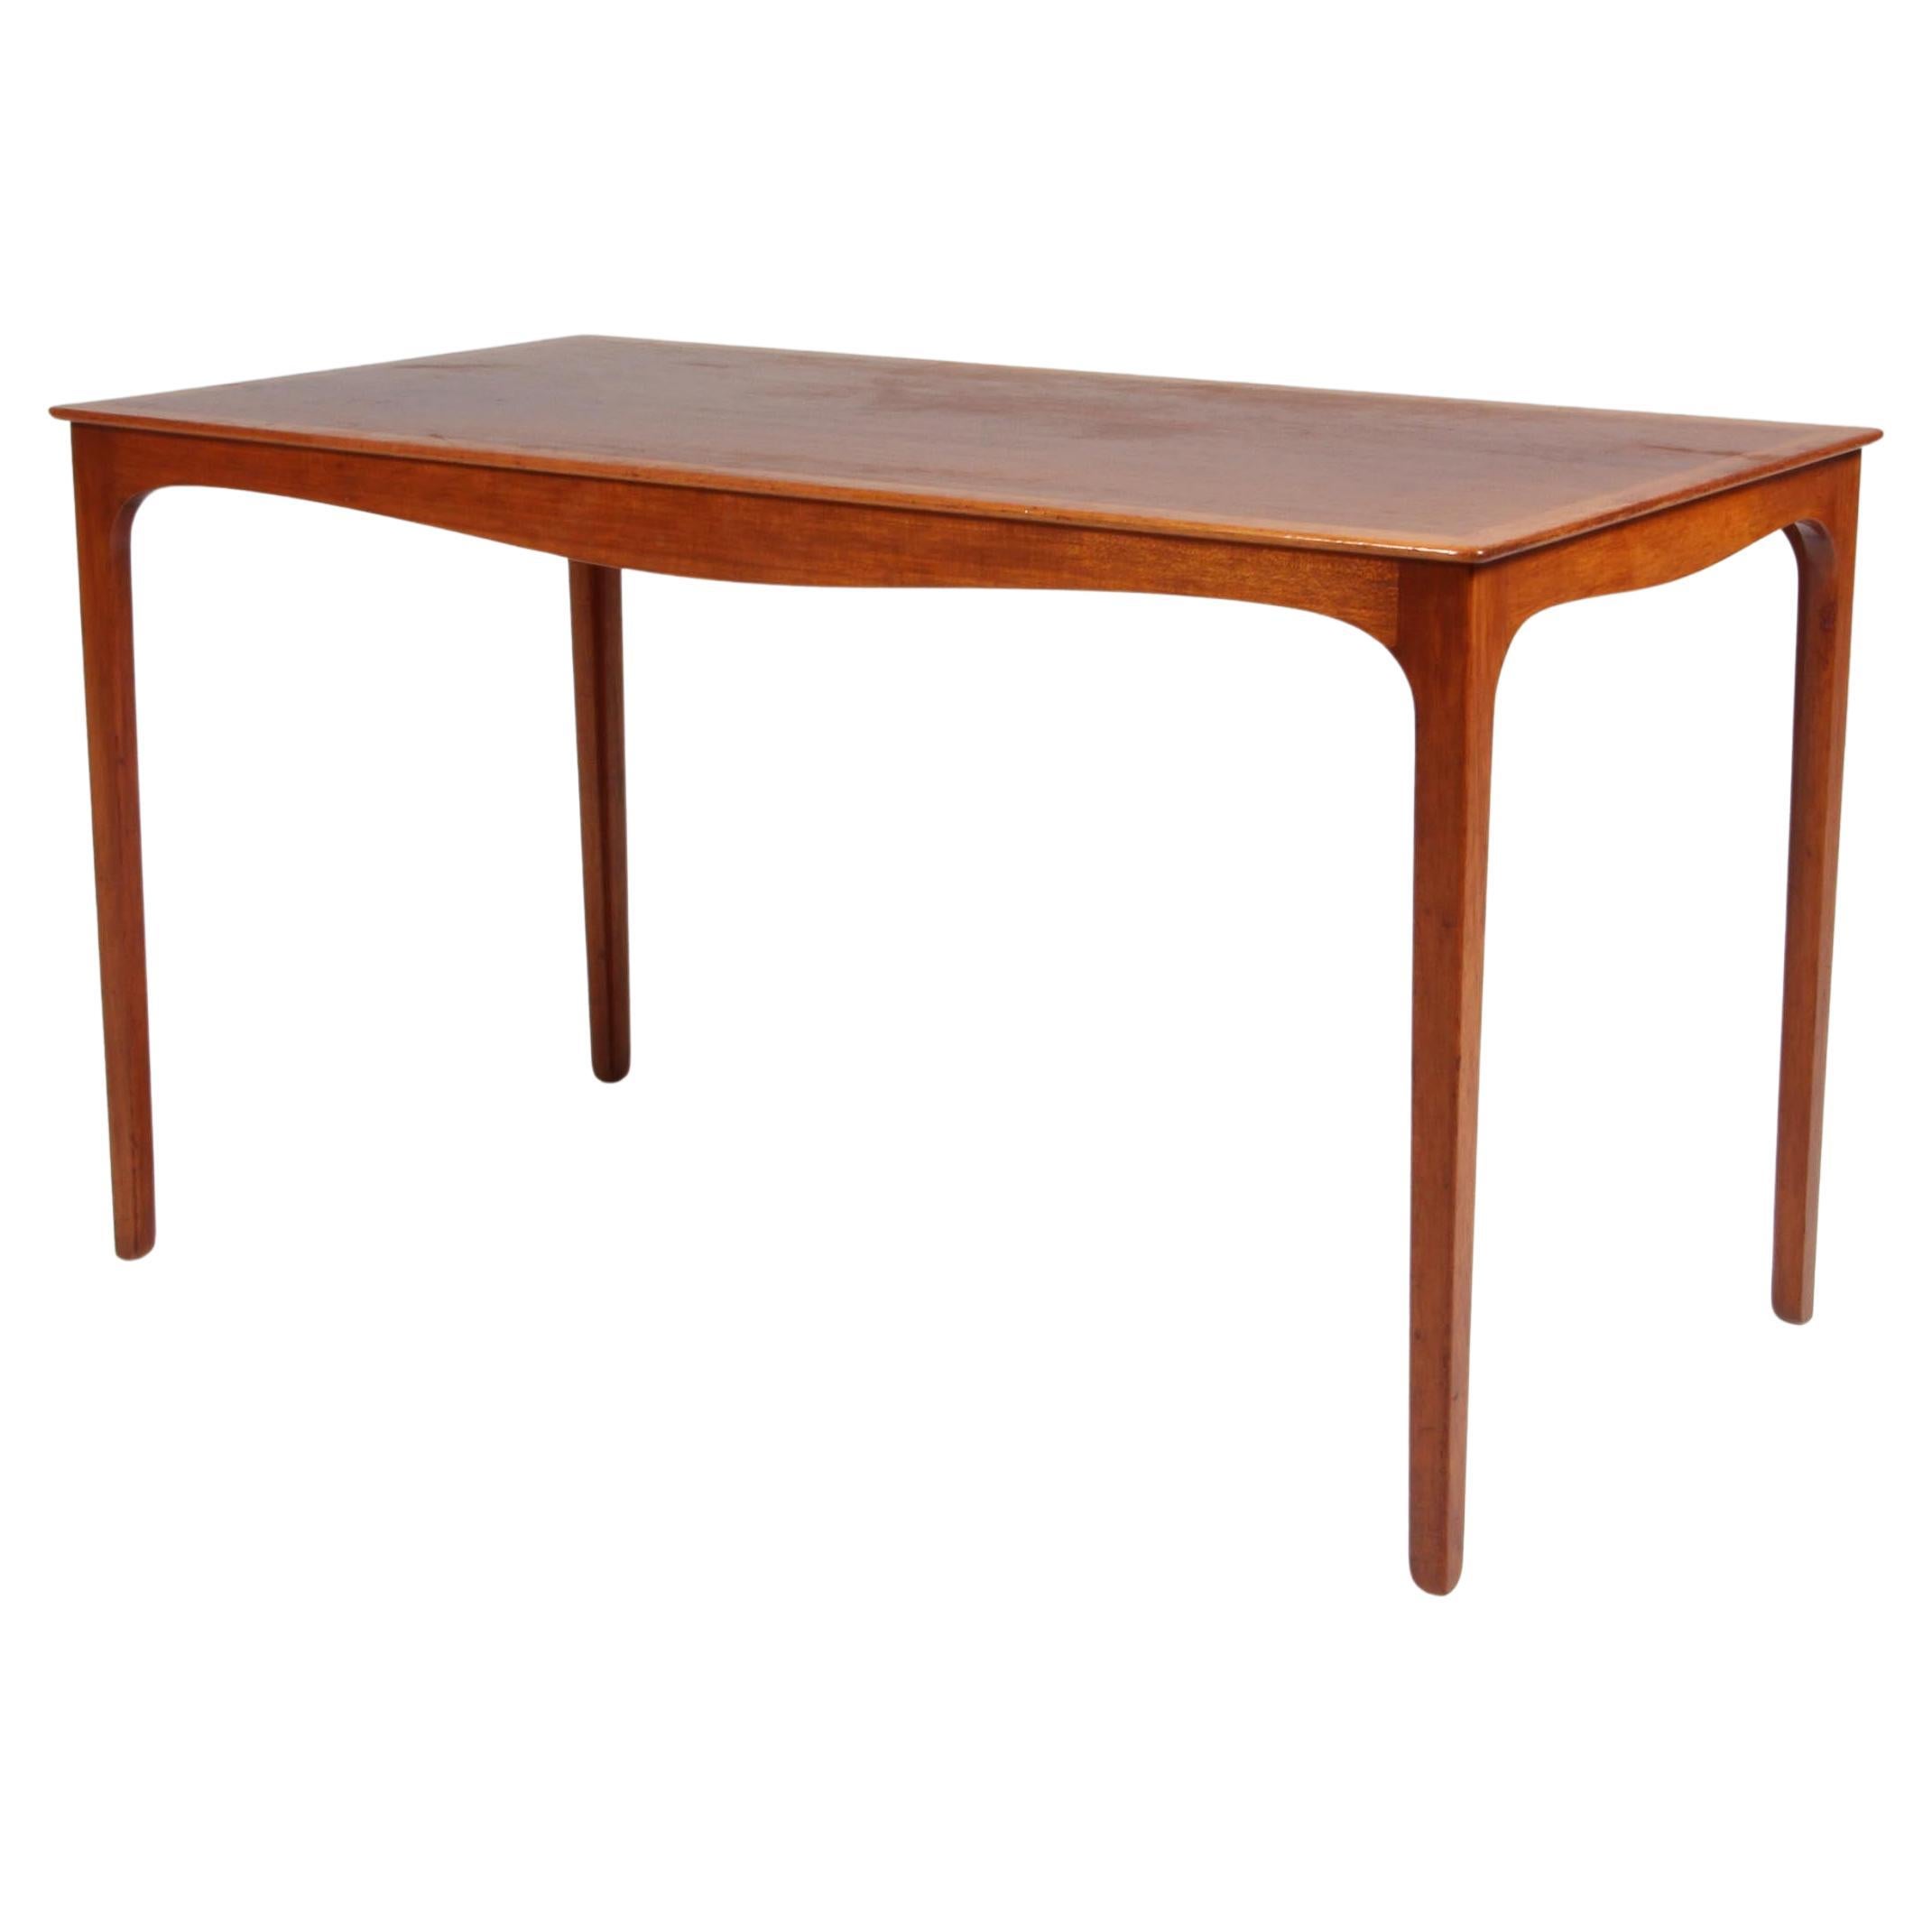 Ole Wanscher Coffee Table, Mahogany, A. J. Iversen For Sale